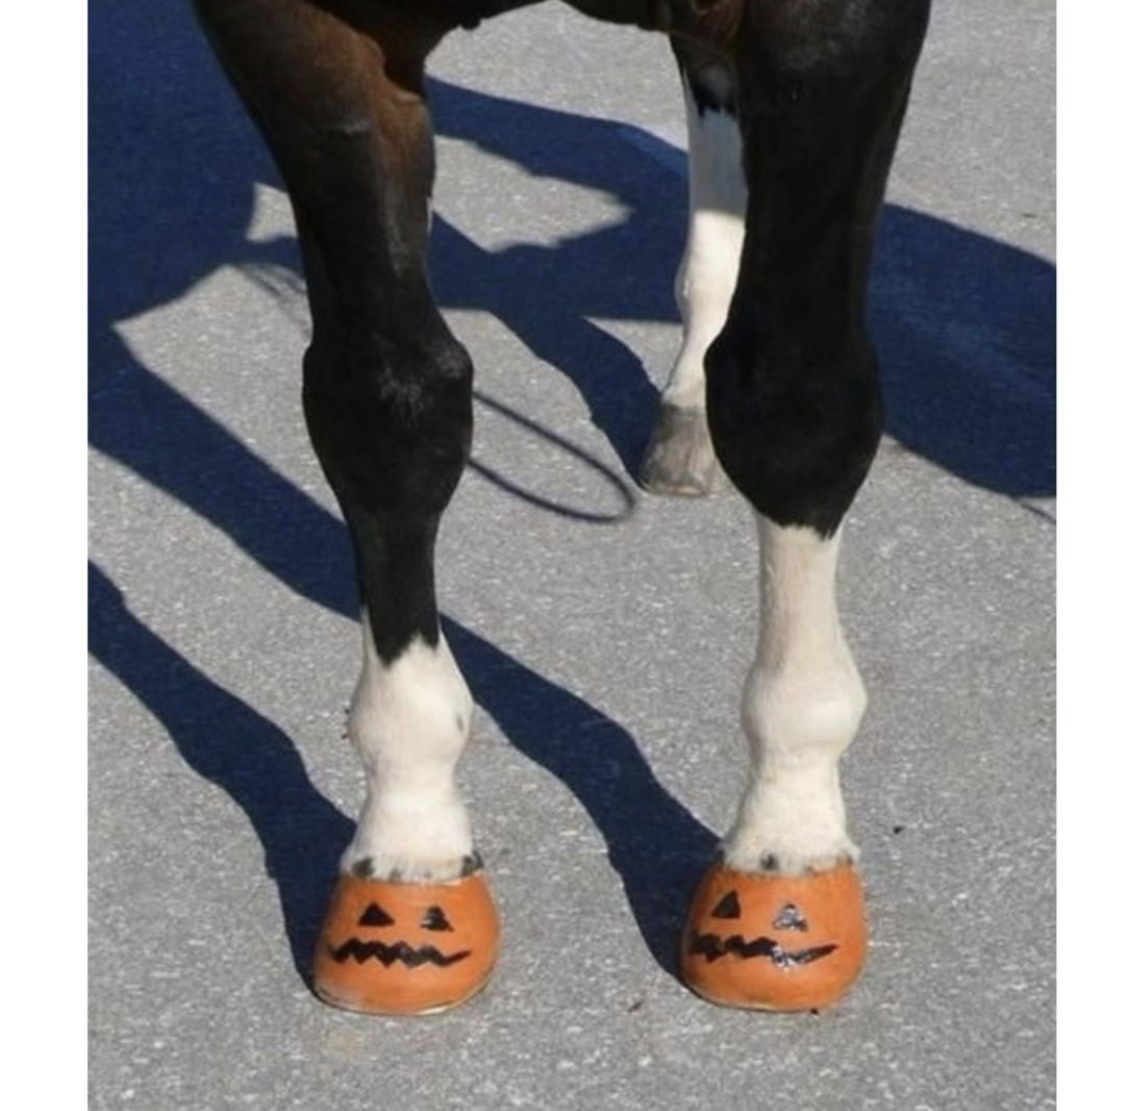 A Horse standing on the pavement with pumpkin face drawn on its hoofs